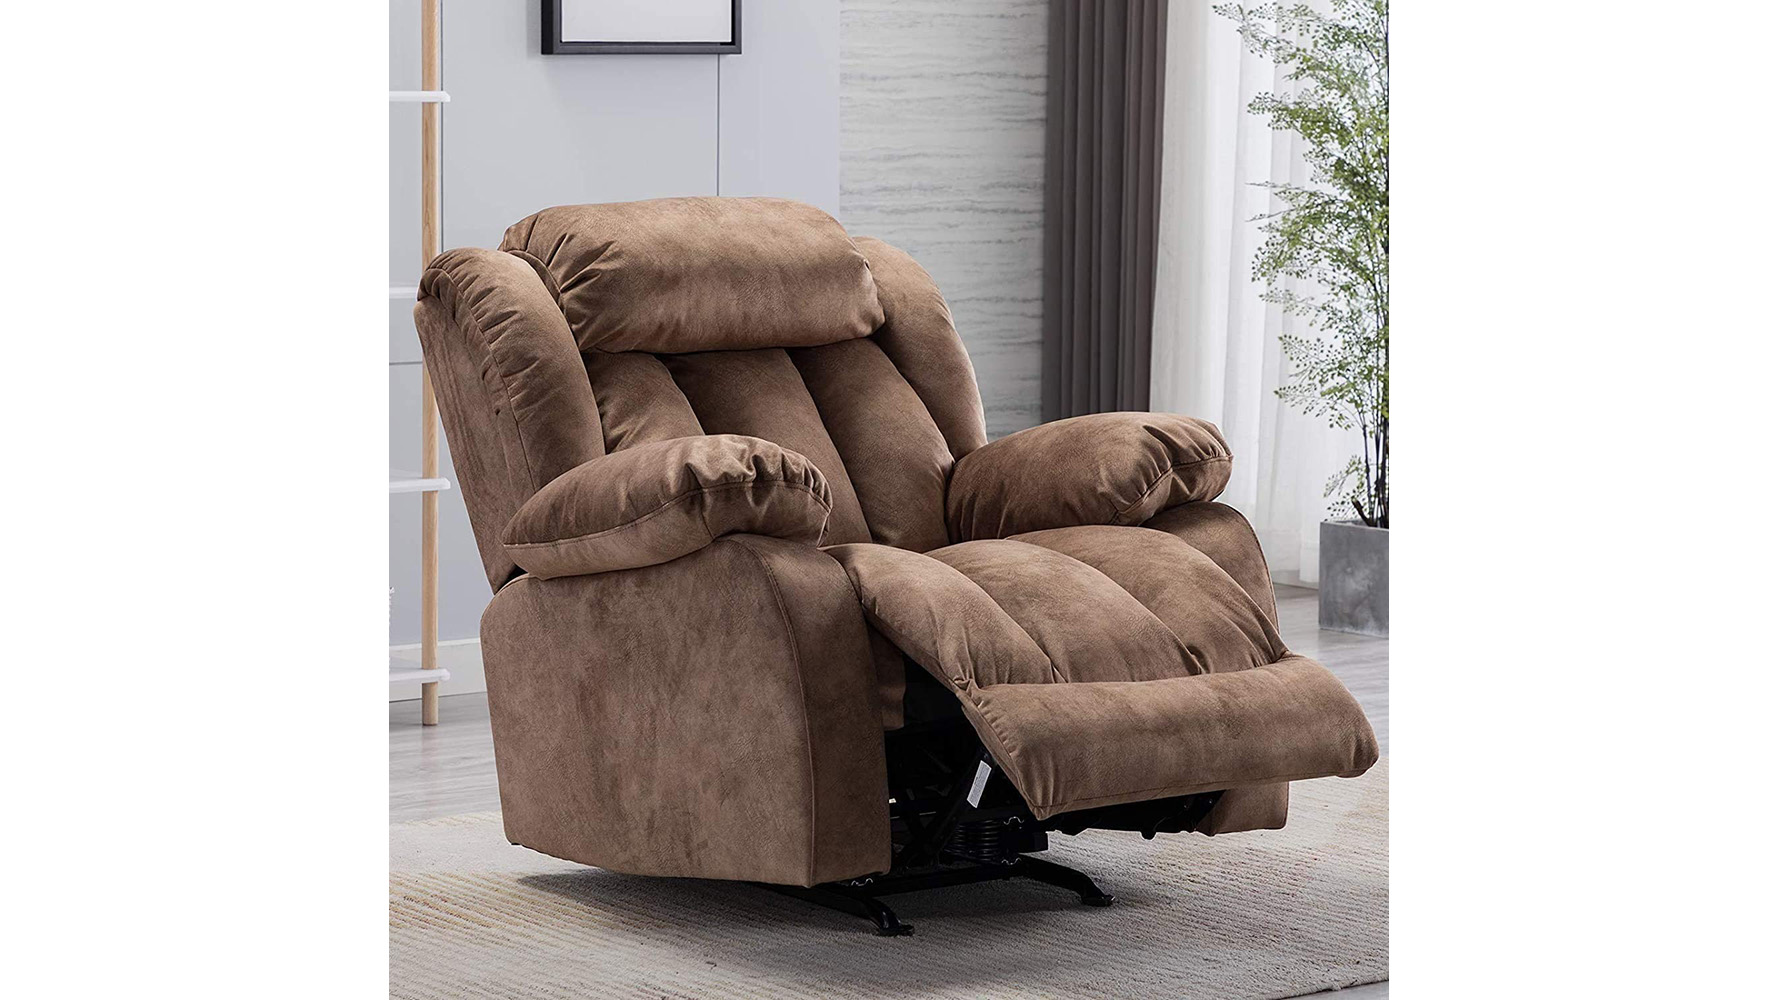 9 Best Recliners for Sleeping Comfortably All Night 2021 - Woman's World